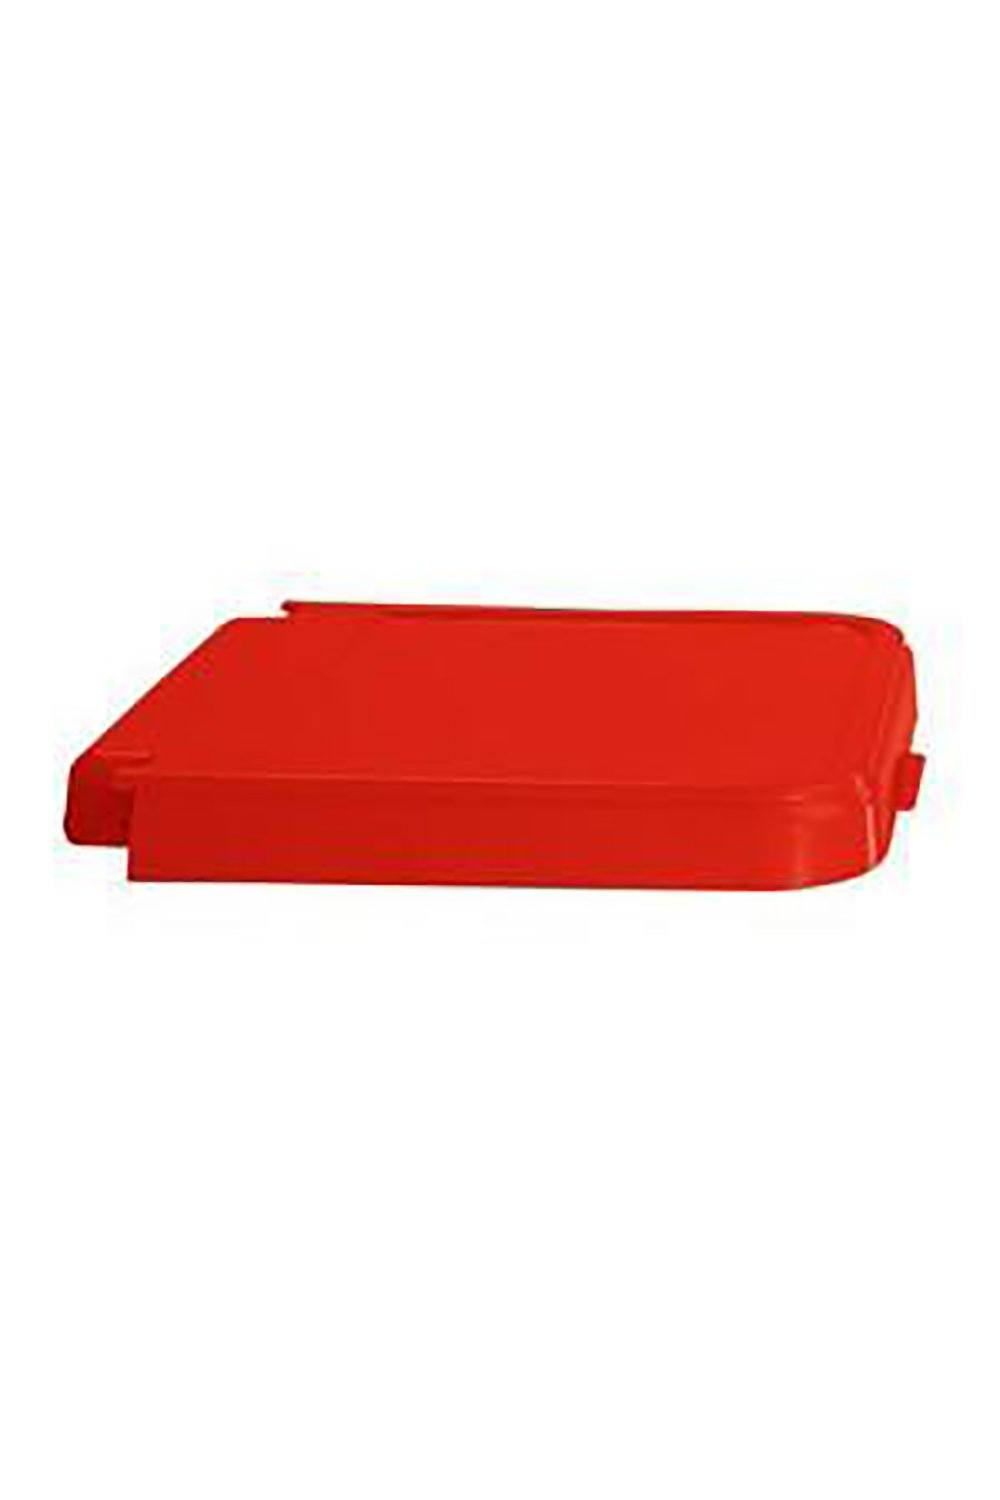 ABS Crack Resistant Replacement Lid Infection Control & Housekeeping R&B 19 x 17.5 Red 